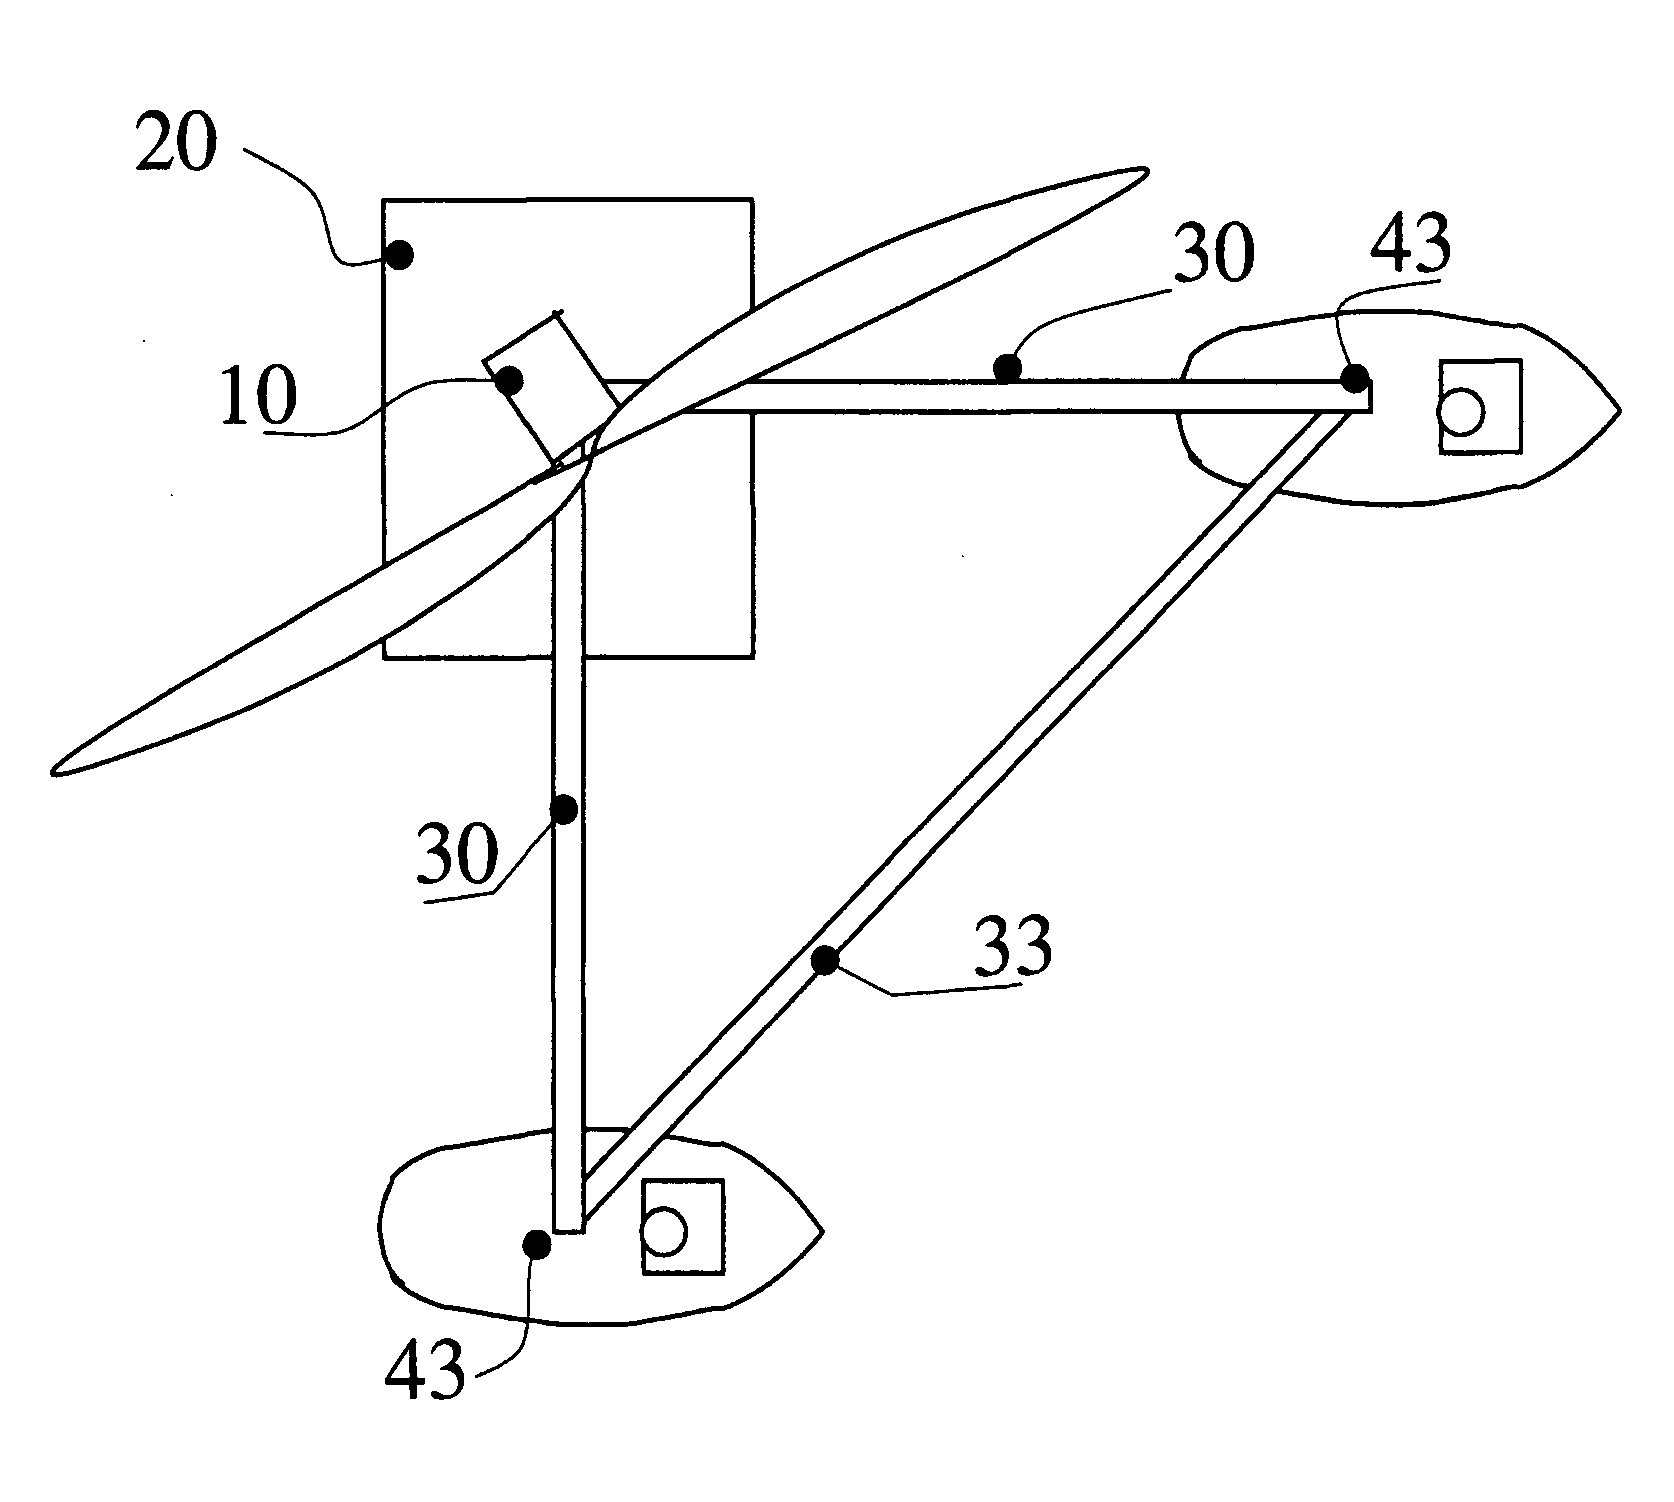 Transportation method for wind energy converters at sea